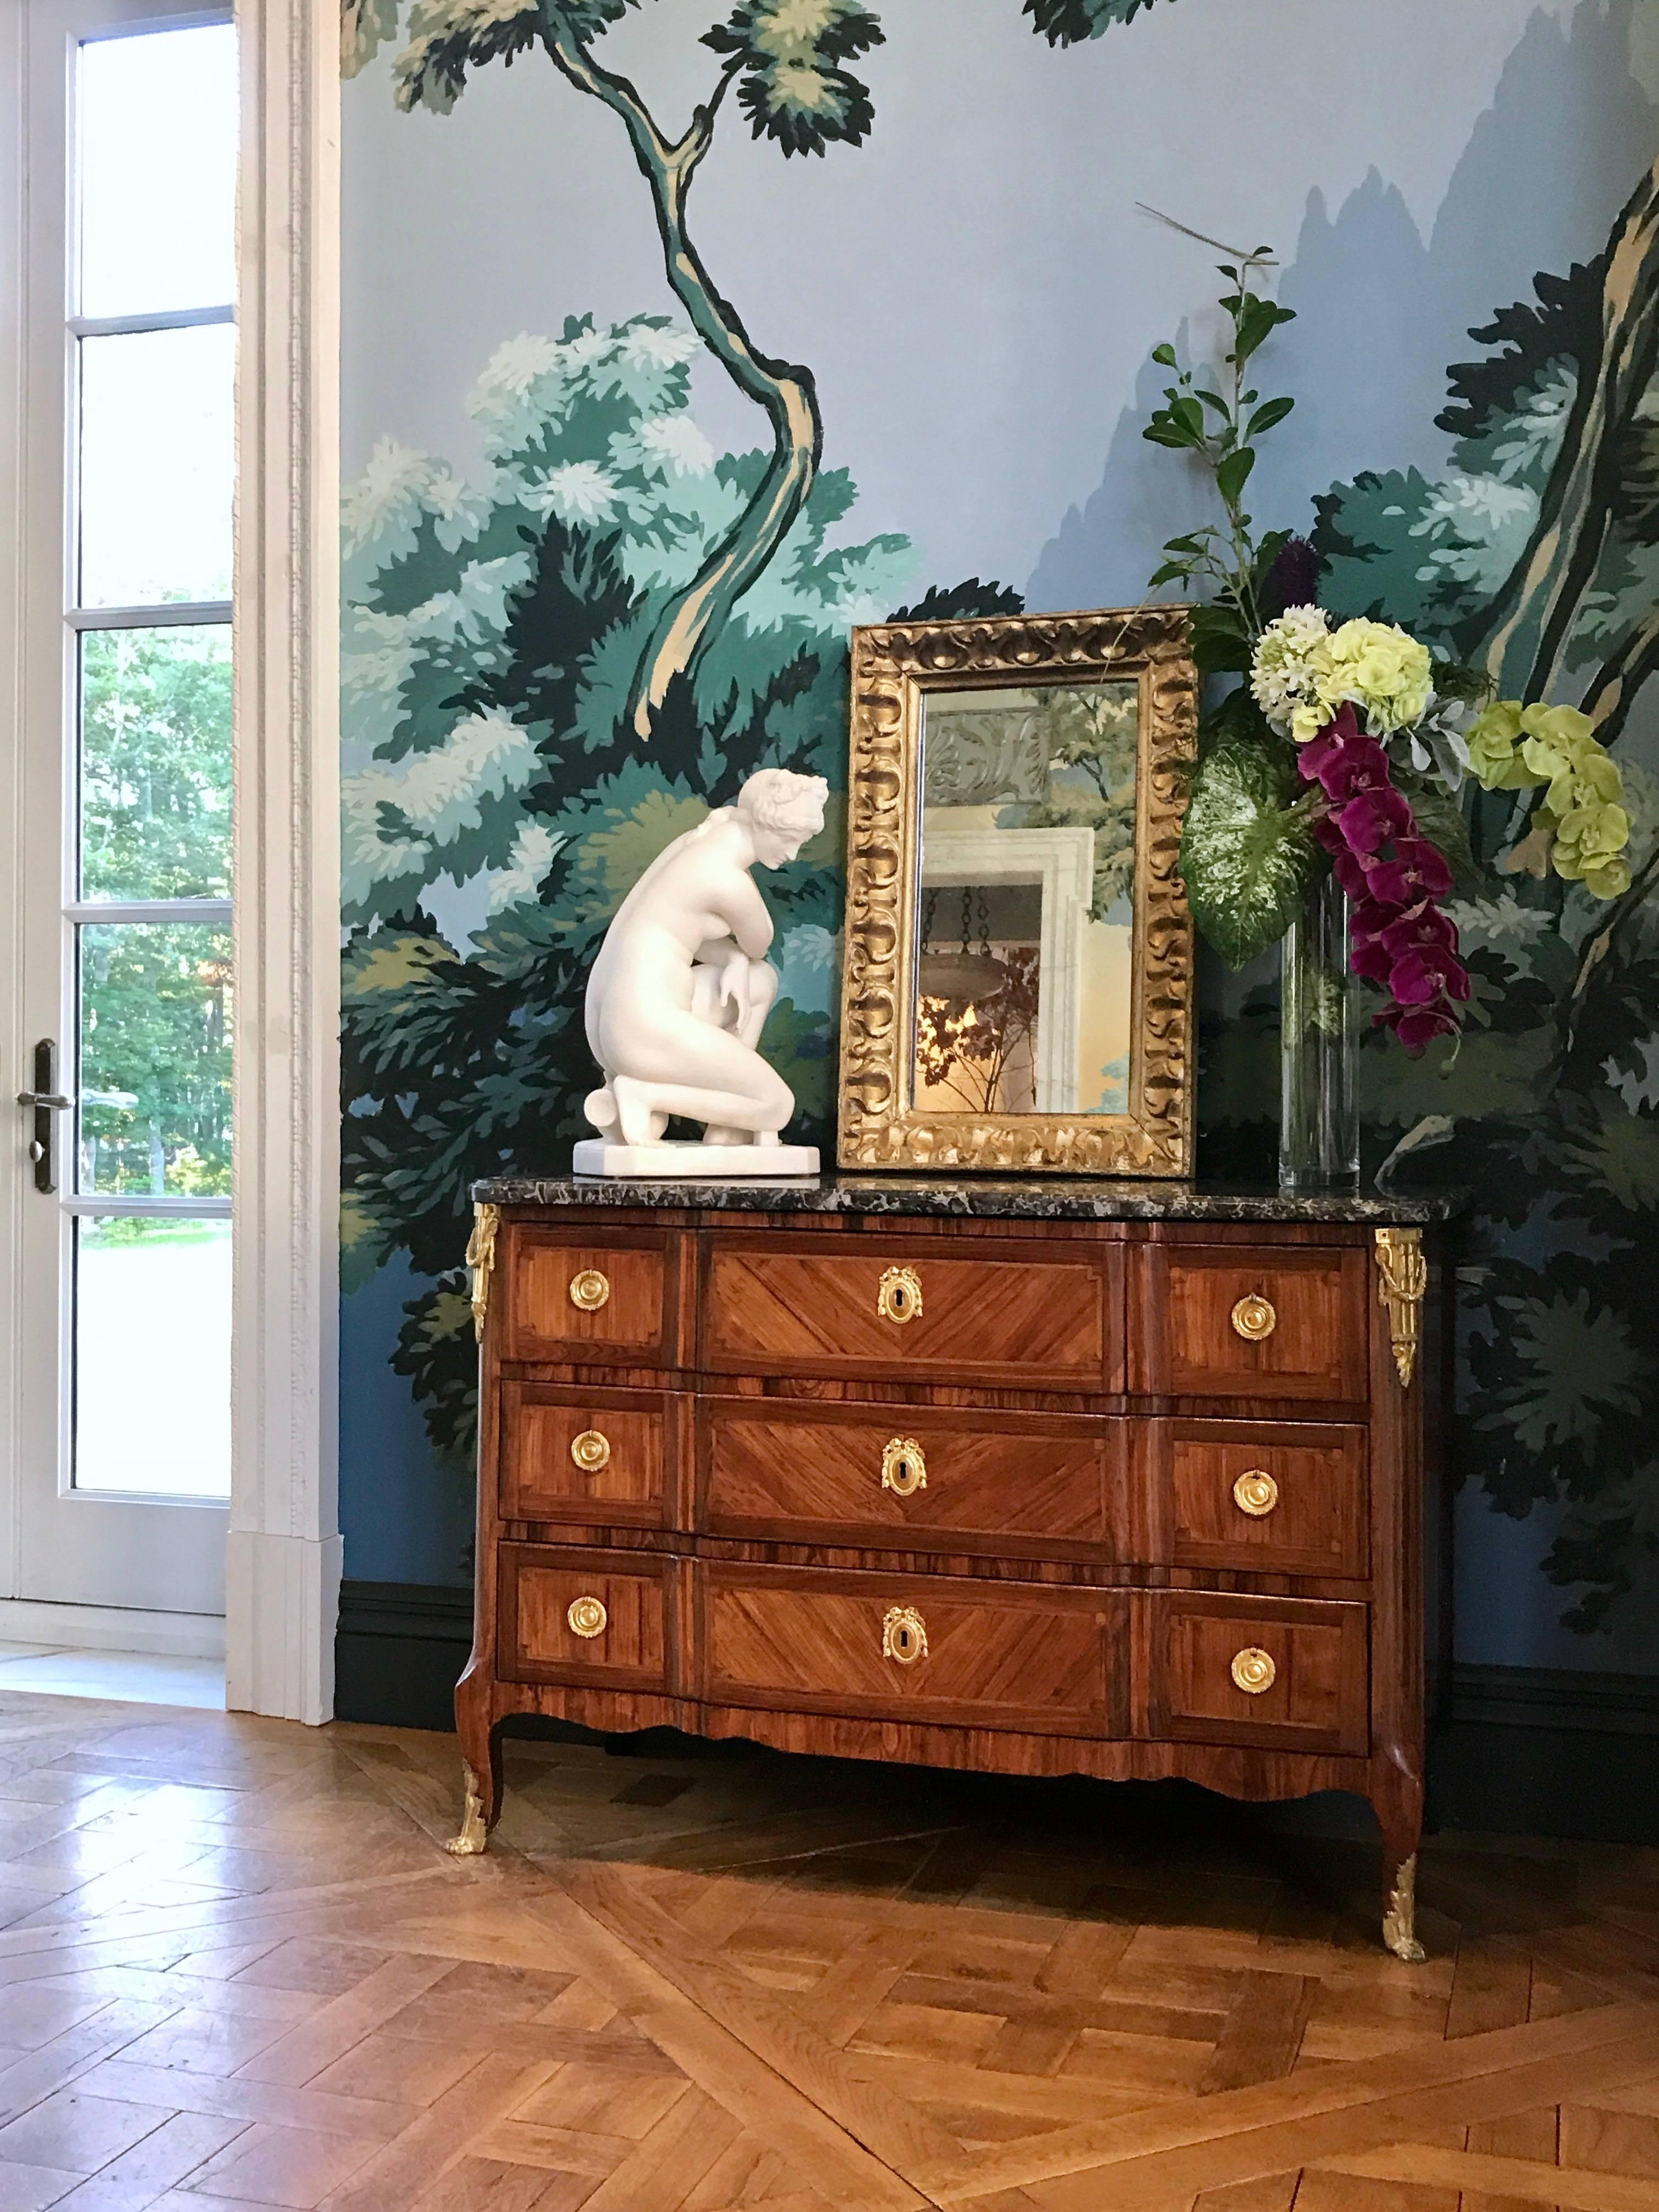 This exquisite Louis the XV/XVI Period transitional Kingwood three over two-drawer commode has an original grey marble top and retains all its original ormolu mounts.
The short cabriole legs terminate in sabots.
Made in France circa 1770.